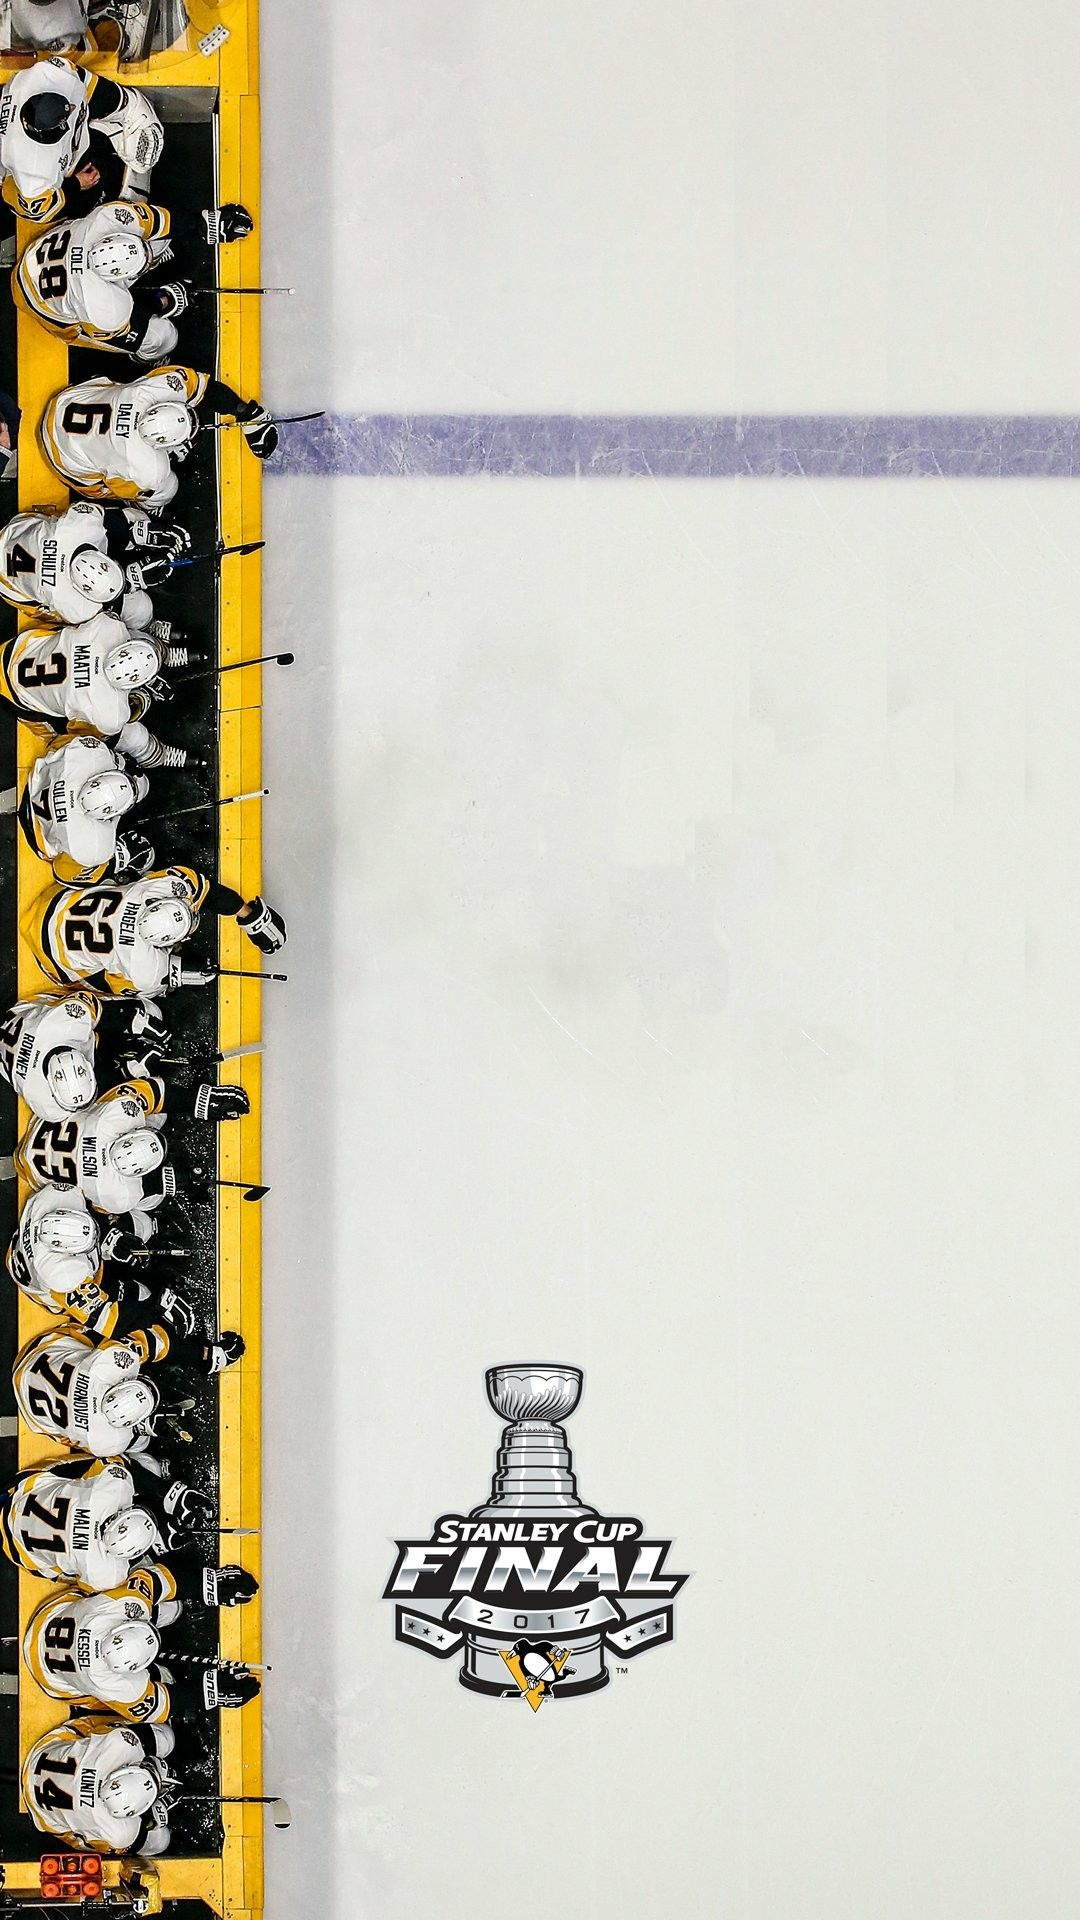 1080x1920 Pittsburgh Penguins Stanley Cup Champions Wallpaper | Pittsburgh penguins wallpaper, Pittsburgh penguins, Pittsburgh penguins hockey